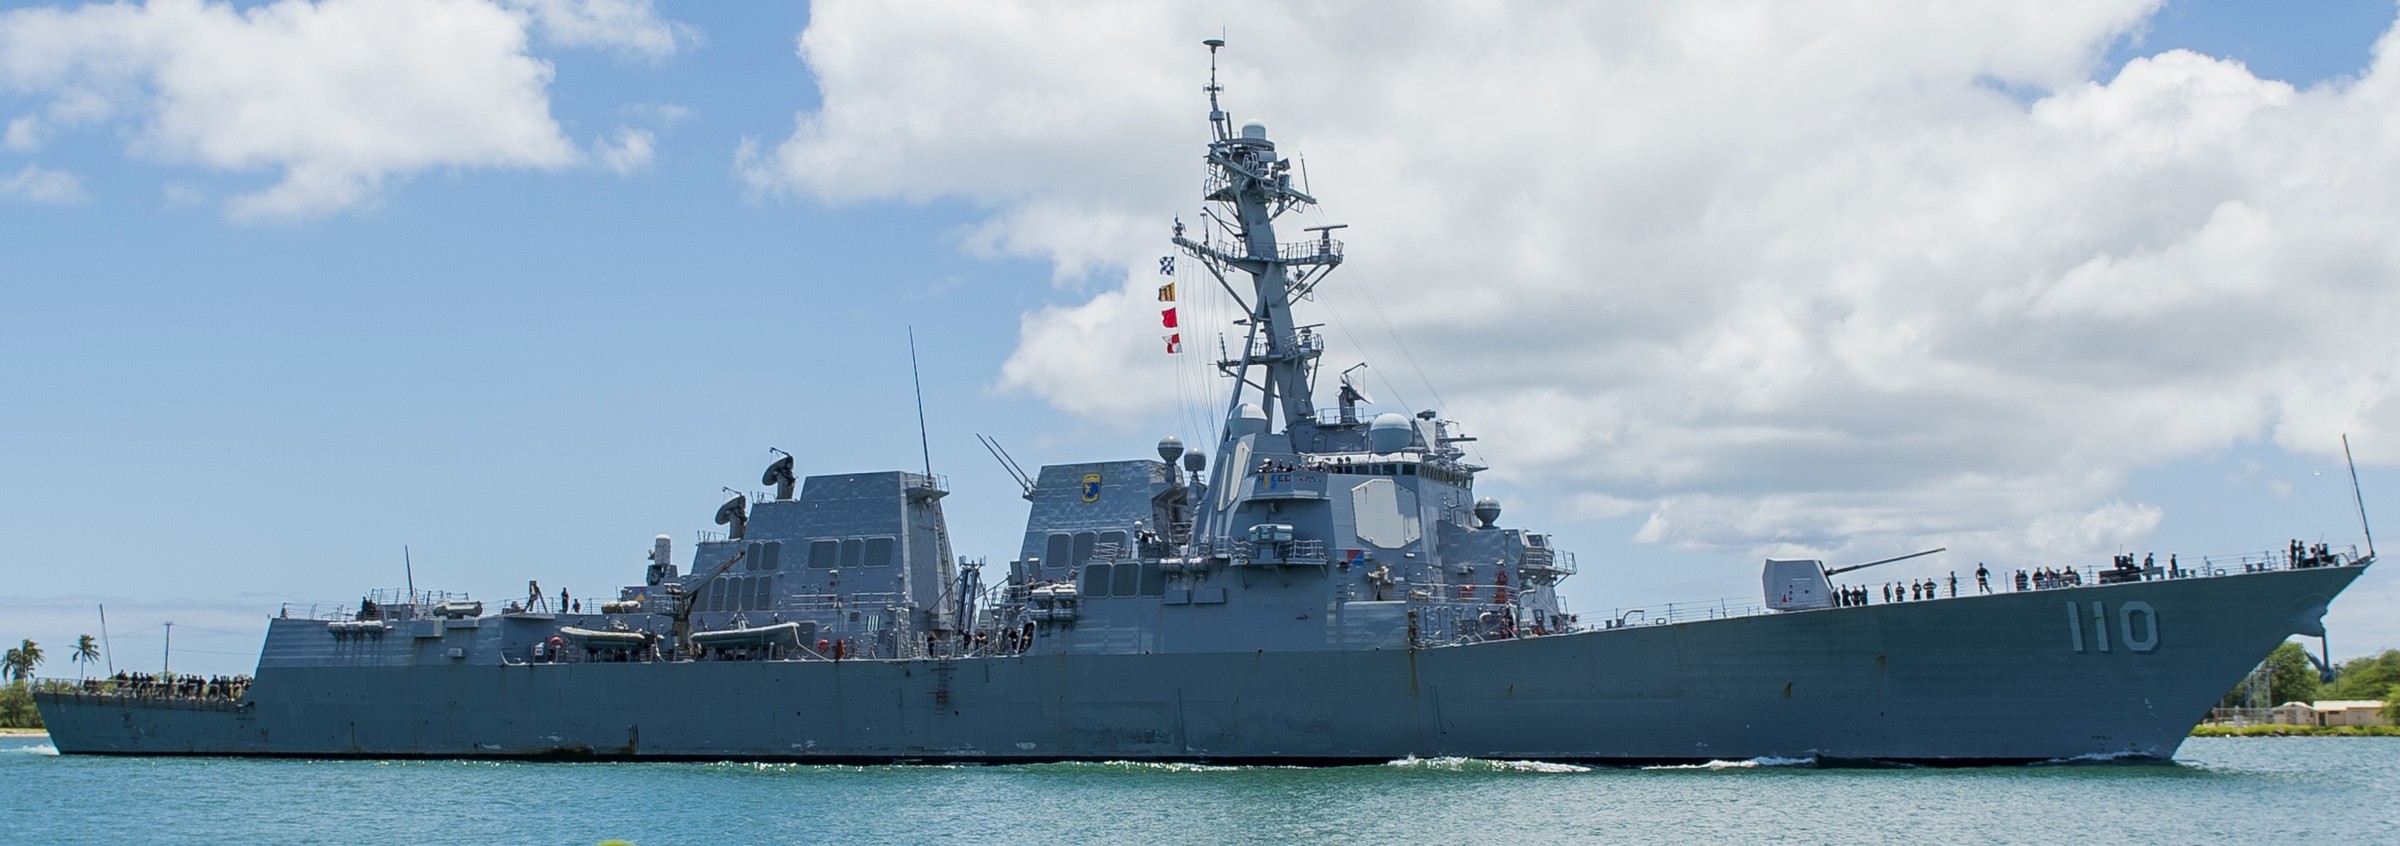 ddg-110 uss william p. lawrence arleigh burke class guided missile destroyer aegis us navy rimpac 2016 33